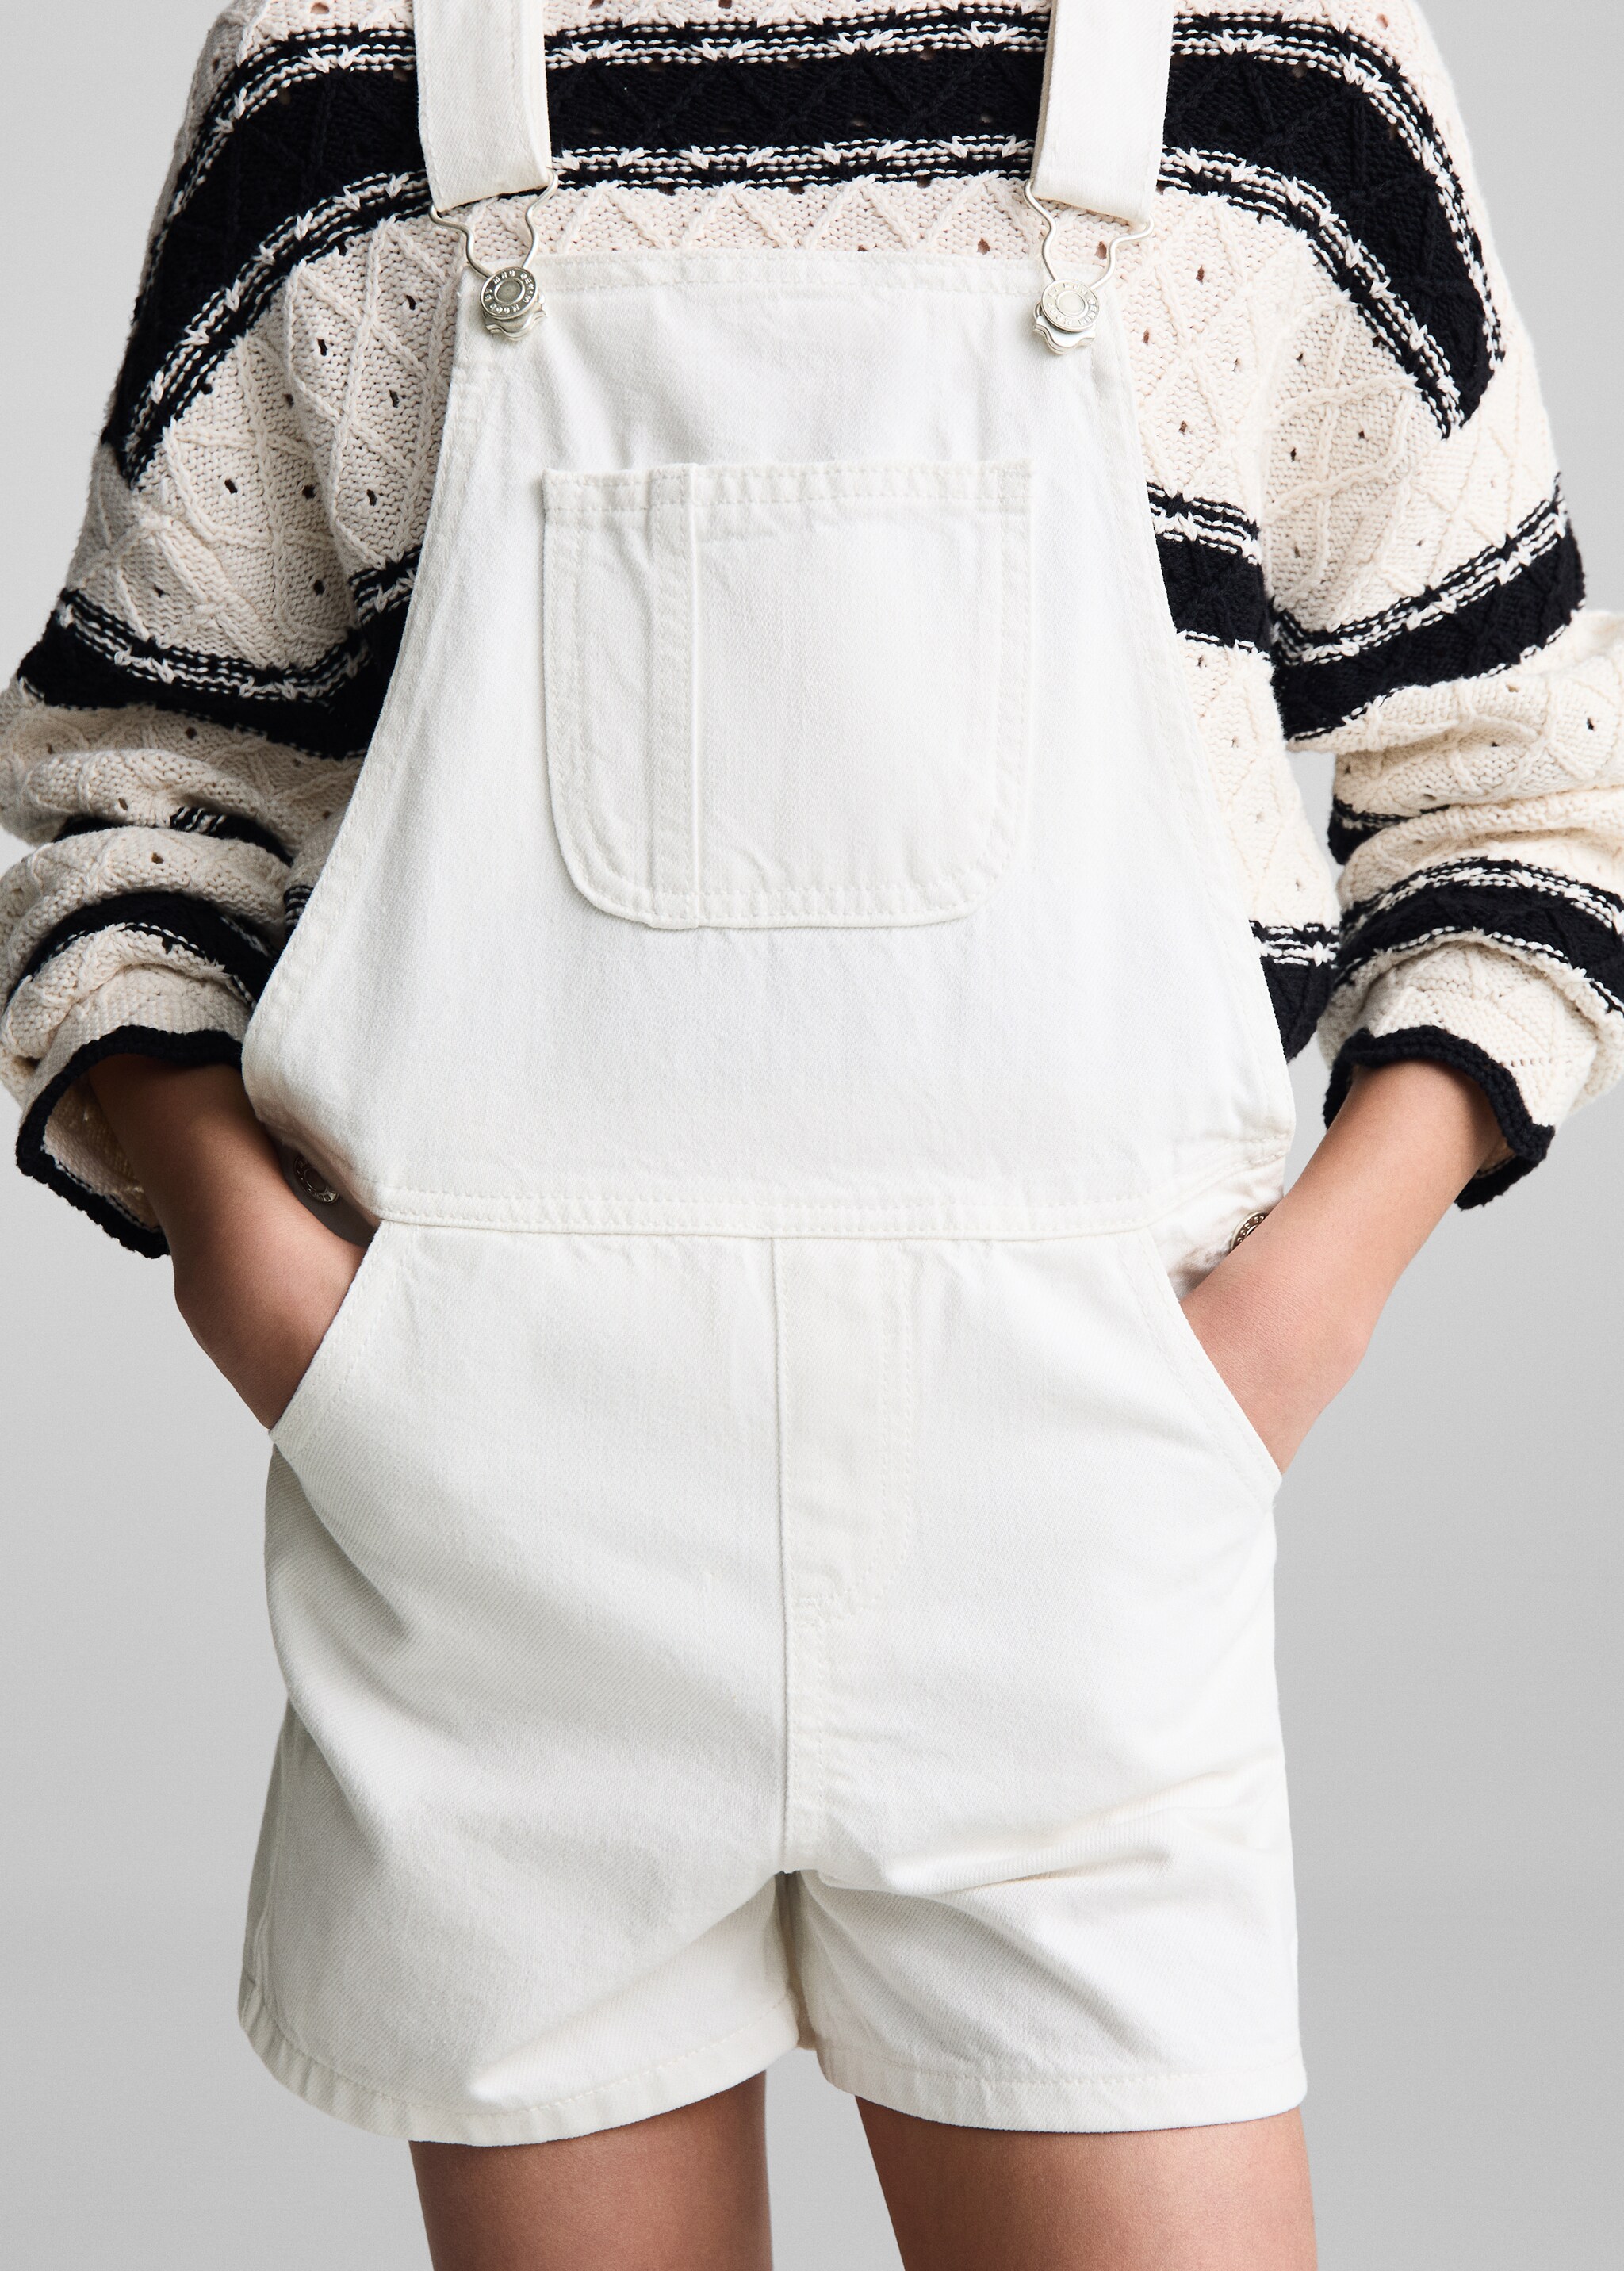 Short denim dungarees - Details of the article 6